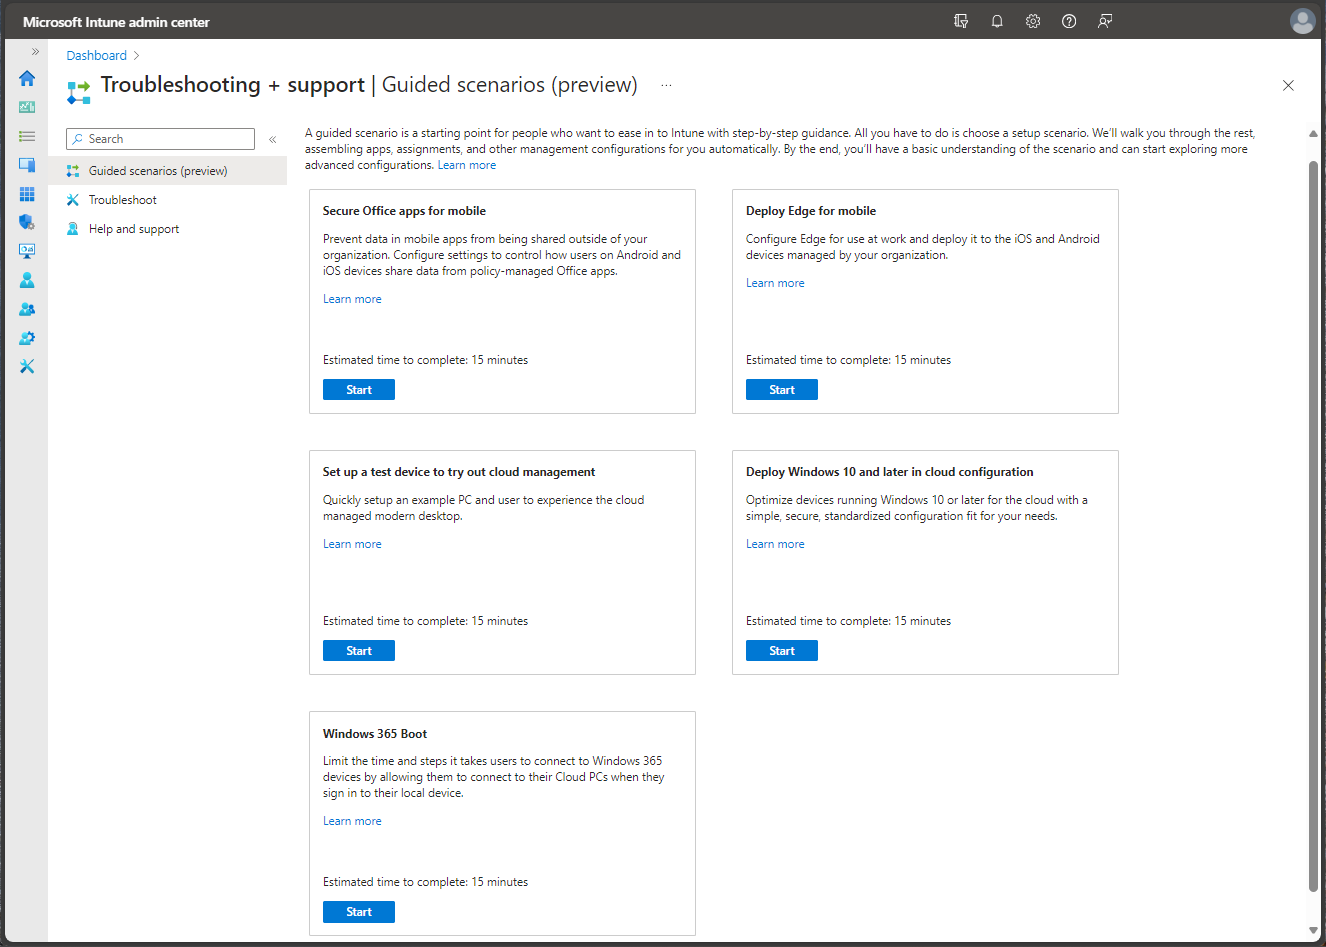 Screenshot of the Microsoft Endpoint Manager admin center - Guided scenarios